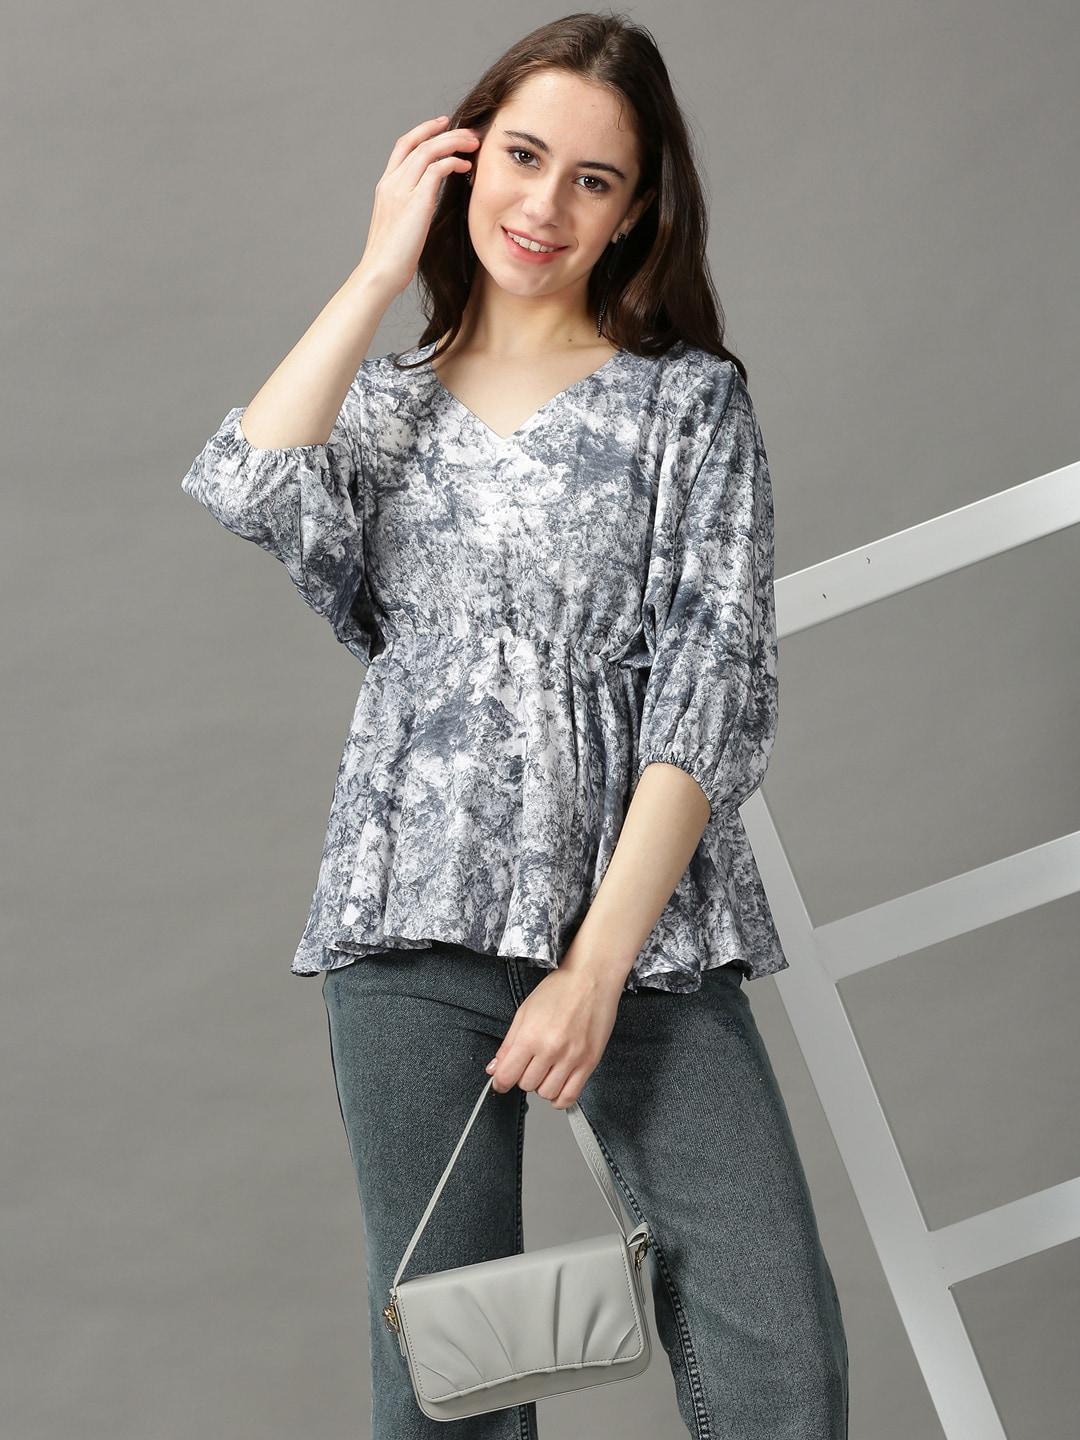 SHOWOFF Grey & Off White Print Crepe Empire Top